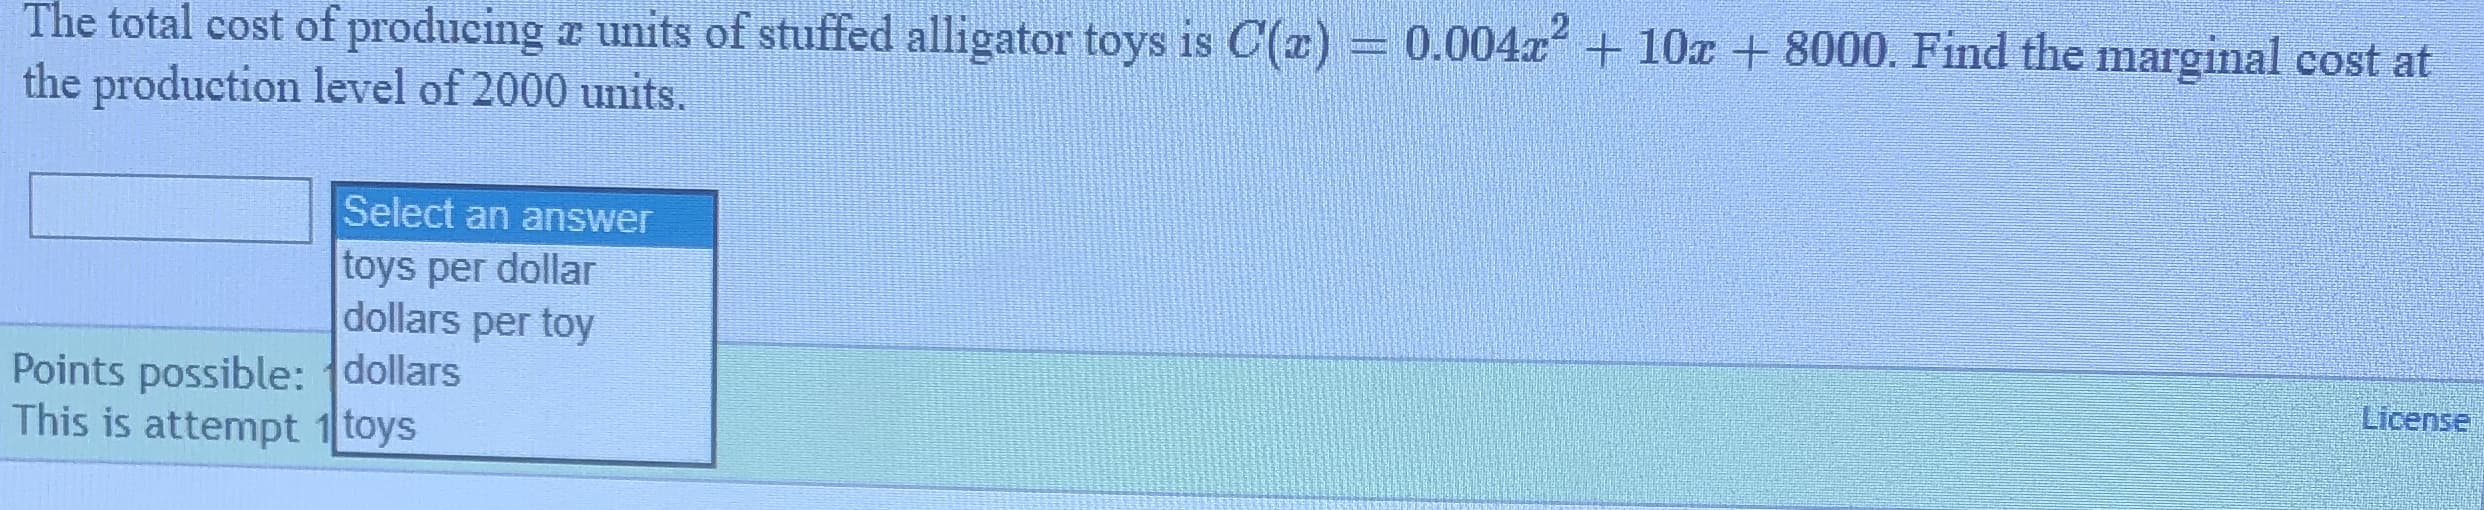 The total cost of producing r units of stuffed alligator toys is C(x) = 0.004x + 10x + 8000. Find the marginal cost at
the production level of 2000 units.
Select an answer
toys per dollar
dollars per toy
Points possible: dollars
This is attempt 1 toys
License
